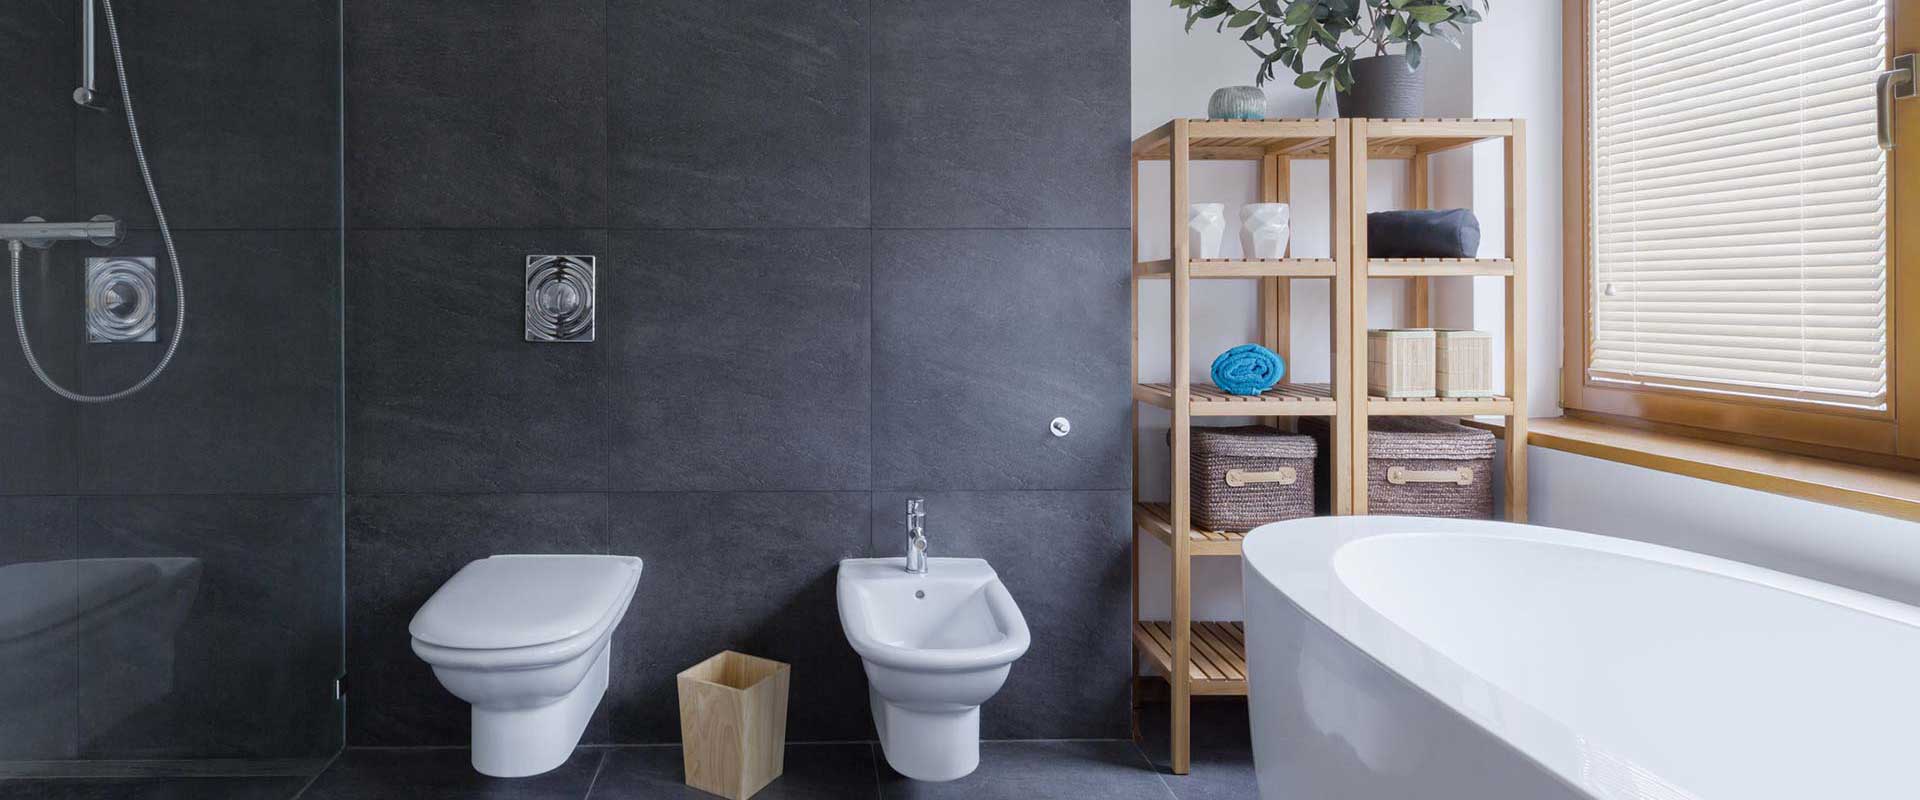 Bathroom Accessories – Choose the Best Bathroom Furniture For Your Home